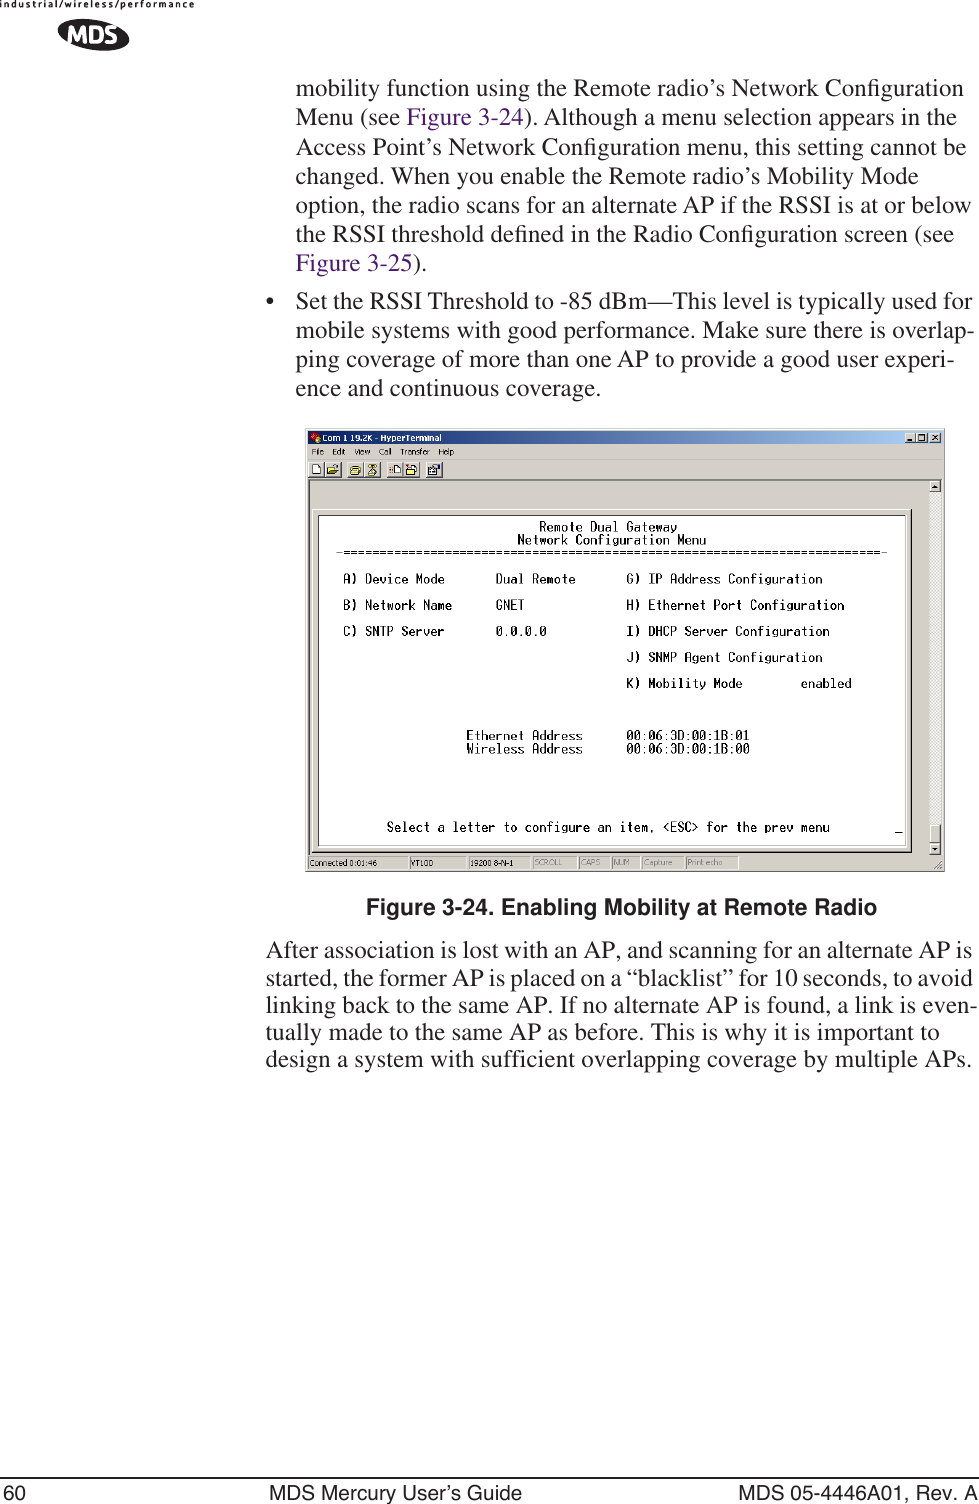 60 MDS Mercury User’s Guide MDS 05-4446A01, Rev. Amobility function using the Remote radio’s Network Conﬁguration Menu (see Figure 3-24). Although a menu selection appears in the Access Point’s Network Conﬁguration menu, this setting cannot be changed. When you enable the Remote radio’s Mobility Mode option, the radio scans for an alternate AP if the RSSI is at or below the RSSI threshold deﬁned in the Radio Conﬁguration screen (see Figure 3-25).•Set the RSSI Threshold to -85 dBm—This level is typically used for mobile systems with good performance. Make sure there is overlap-ping coverage of more than one AP to provide a good user experi-ence and continuous coverage. Invisible place holderFigure 3-24. Enabling Mobility at Remote RadioAfter association is lost with an AP, and scanning for an alternate AP is started, the former AP is placed on a “blacklist” for 10 seconds, to avoid linking back to the same AP. If no alternate AP is found, a link is even-tually made to the same AP as before. This is why it is important to design a system with sufficient overlapping coverage by multiple APs.